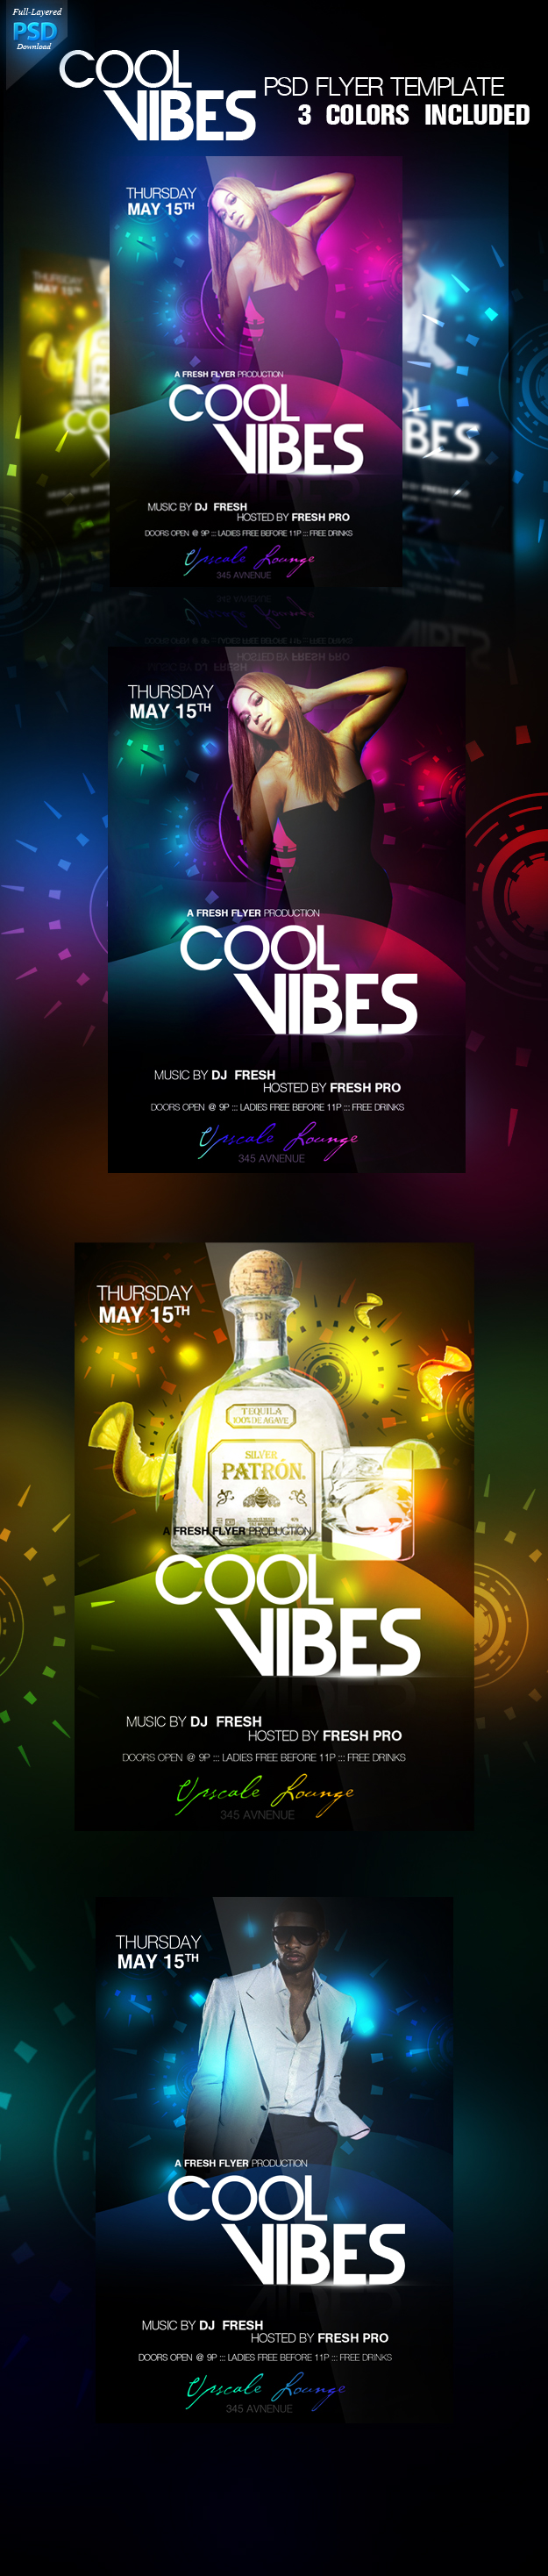 Cool Vibes Club Flyer  Templates